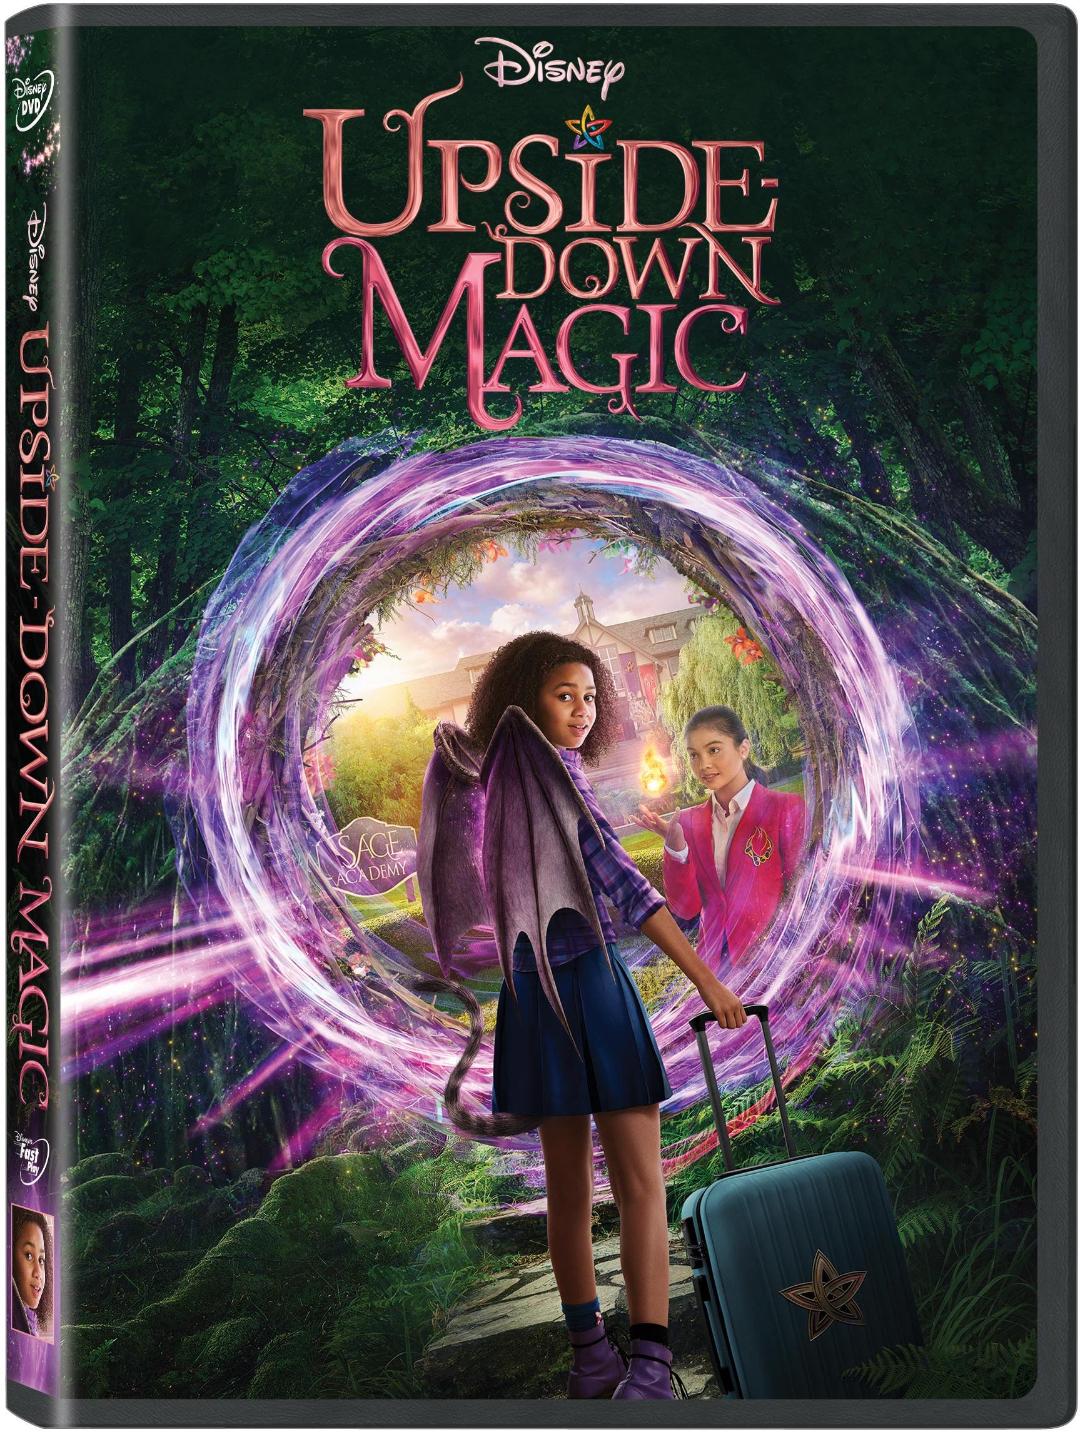 Disney's Upside Down Magic Review and Giveaway